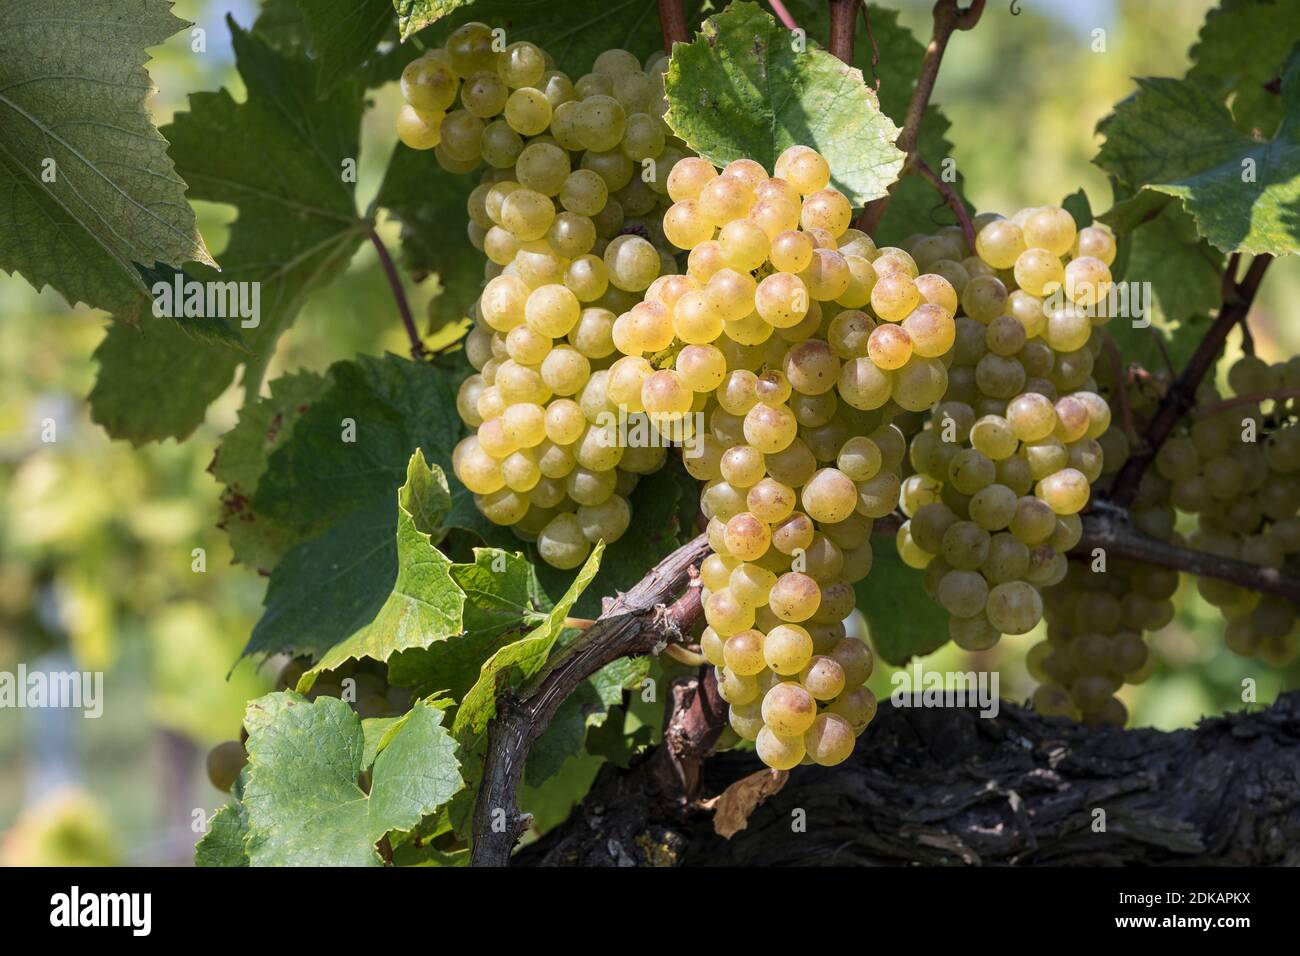 Grapes with berries of a white grape variety, Maurer Weinberge, Vienna, Austria Stock Photo